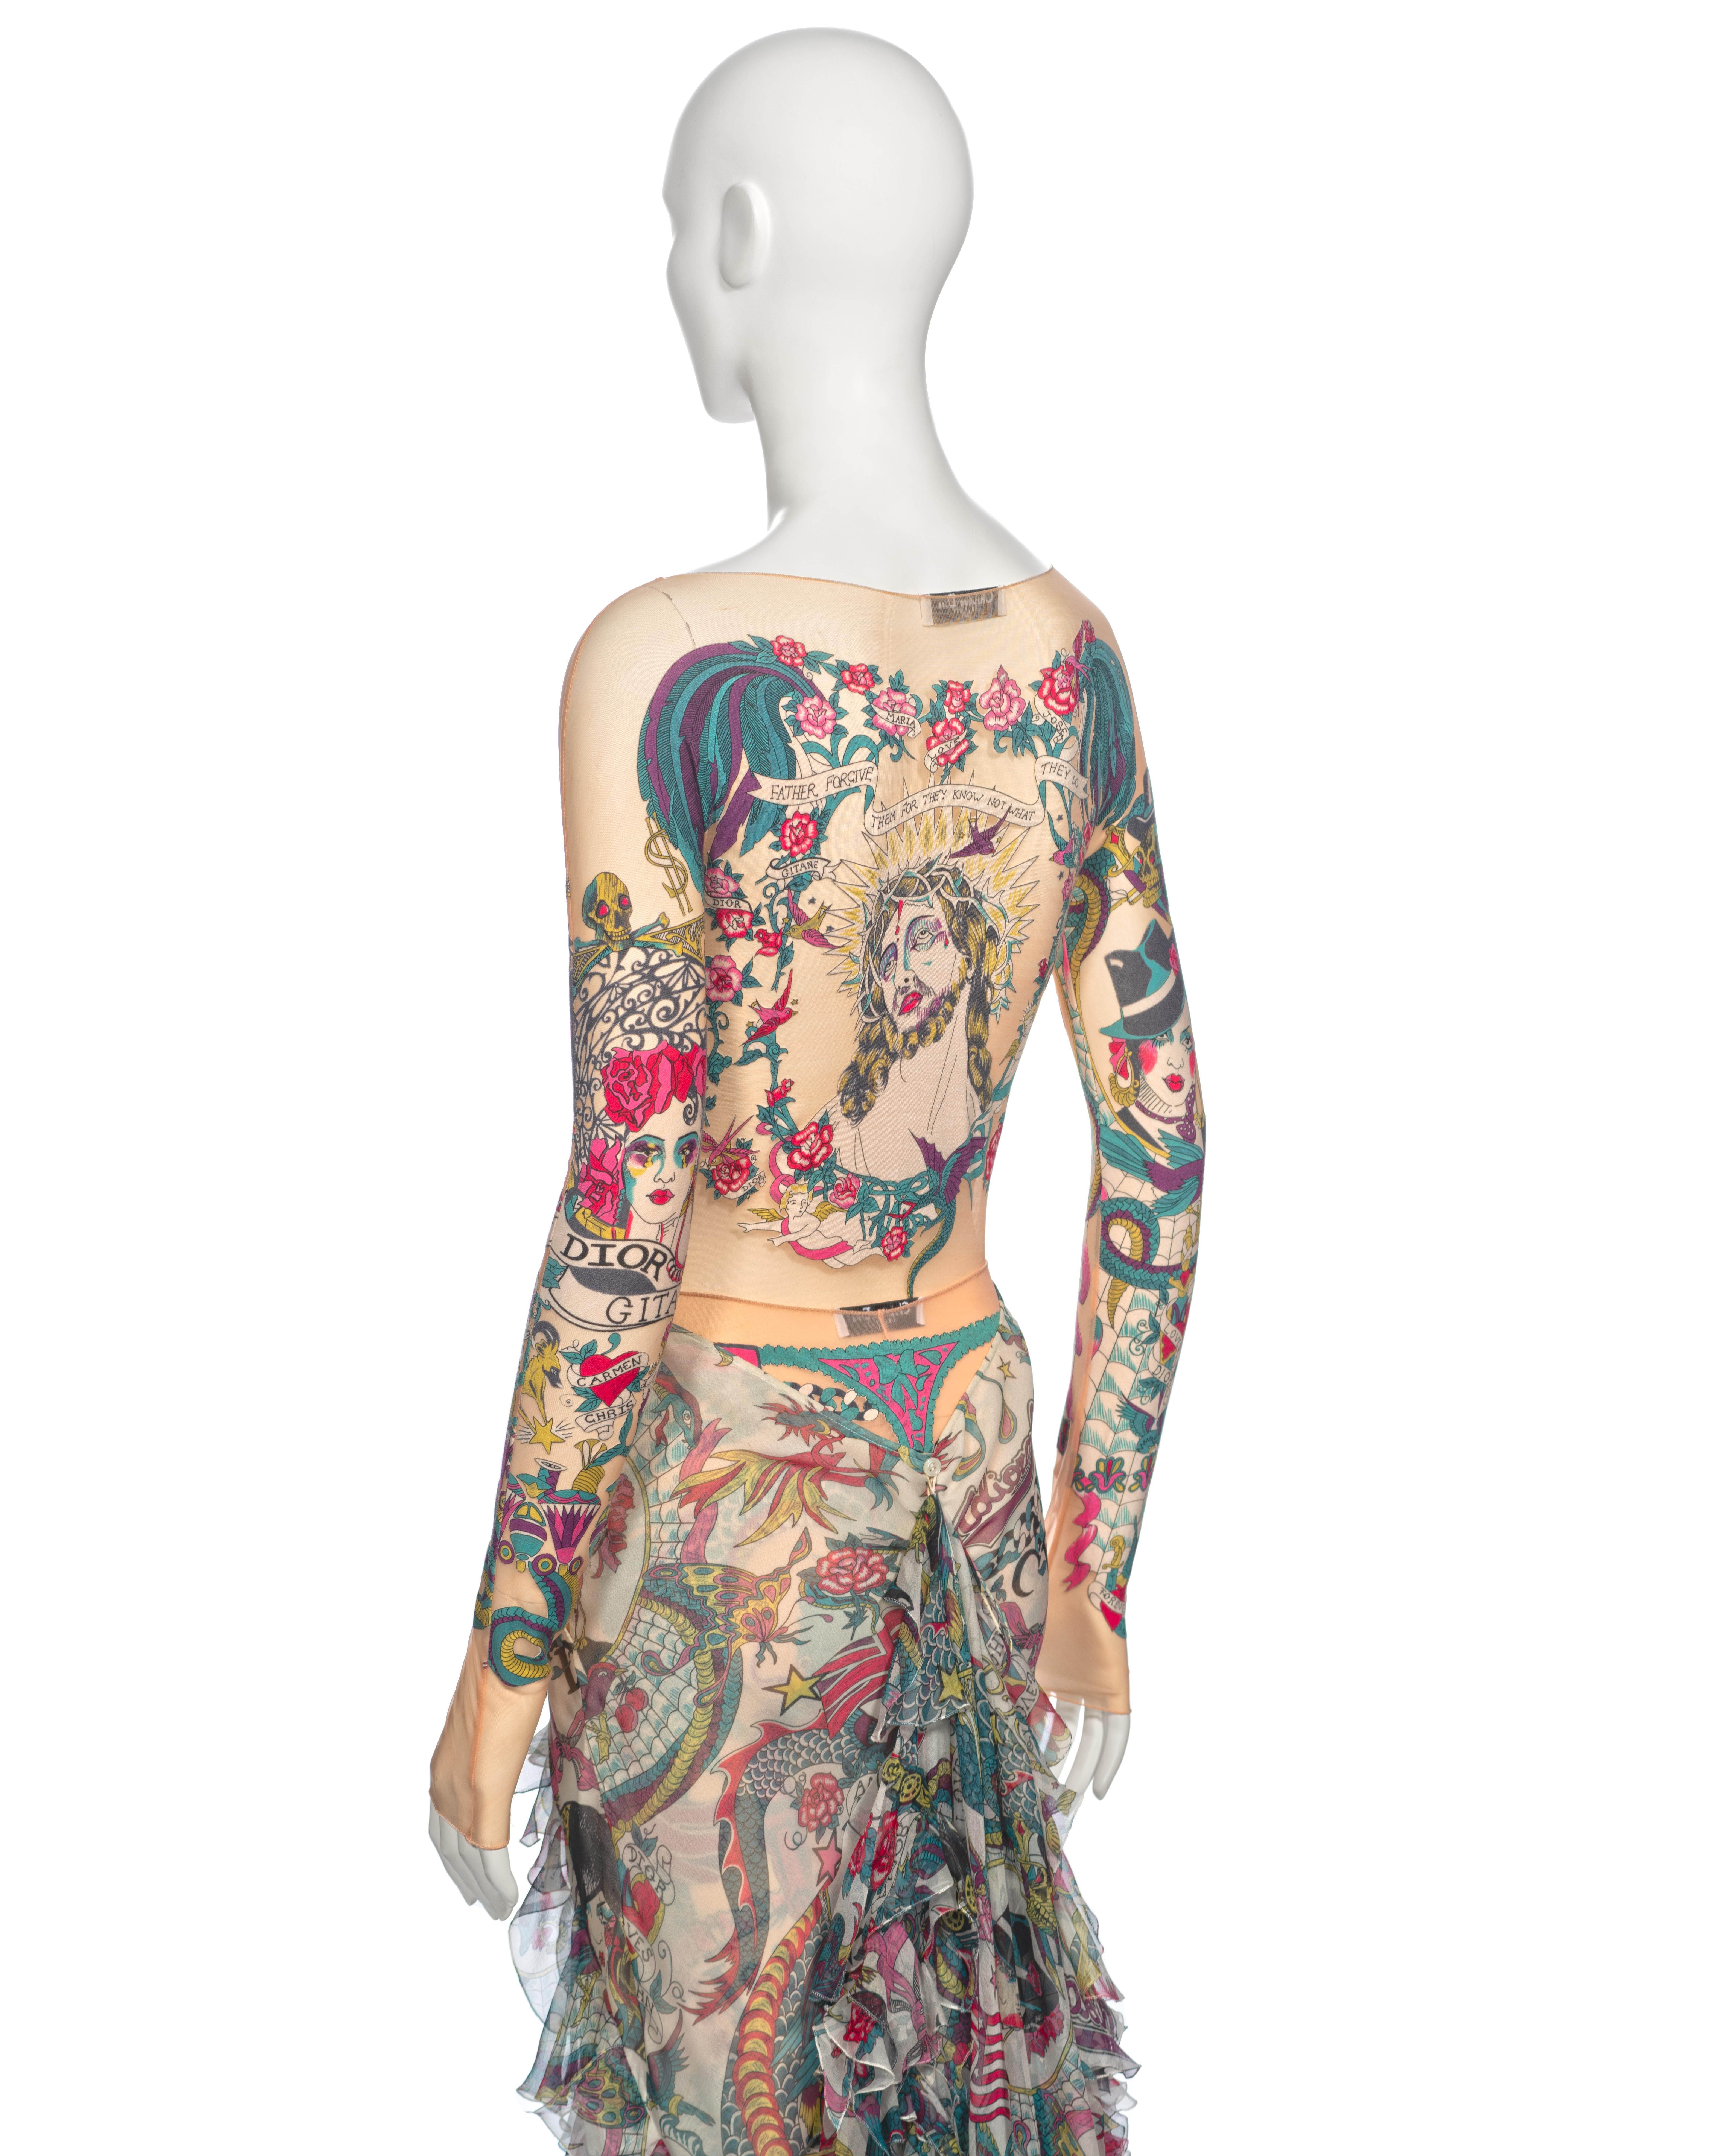 Christian Dior by John Galliano Tattoo Print Body, Leggings and Skirt, ss 2004 For Sale 9